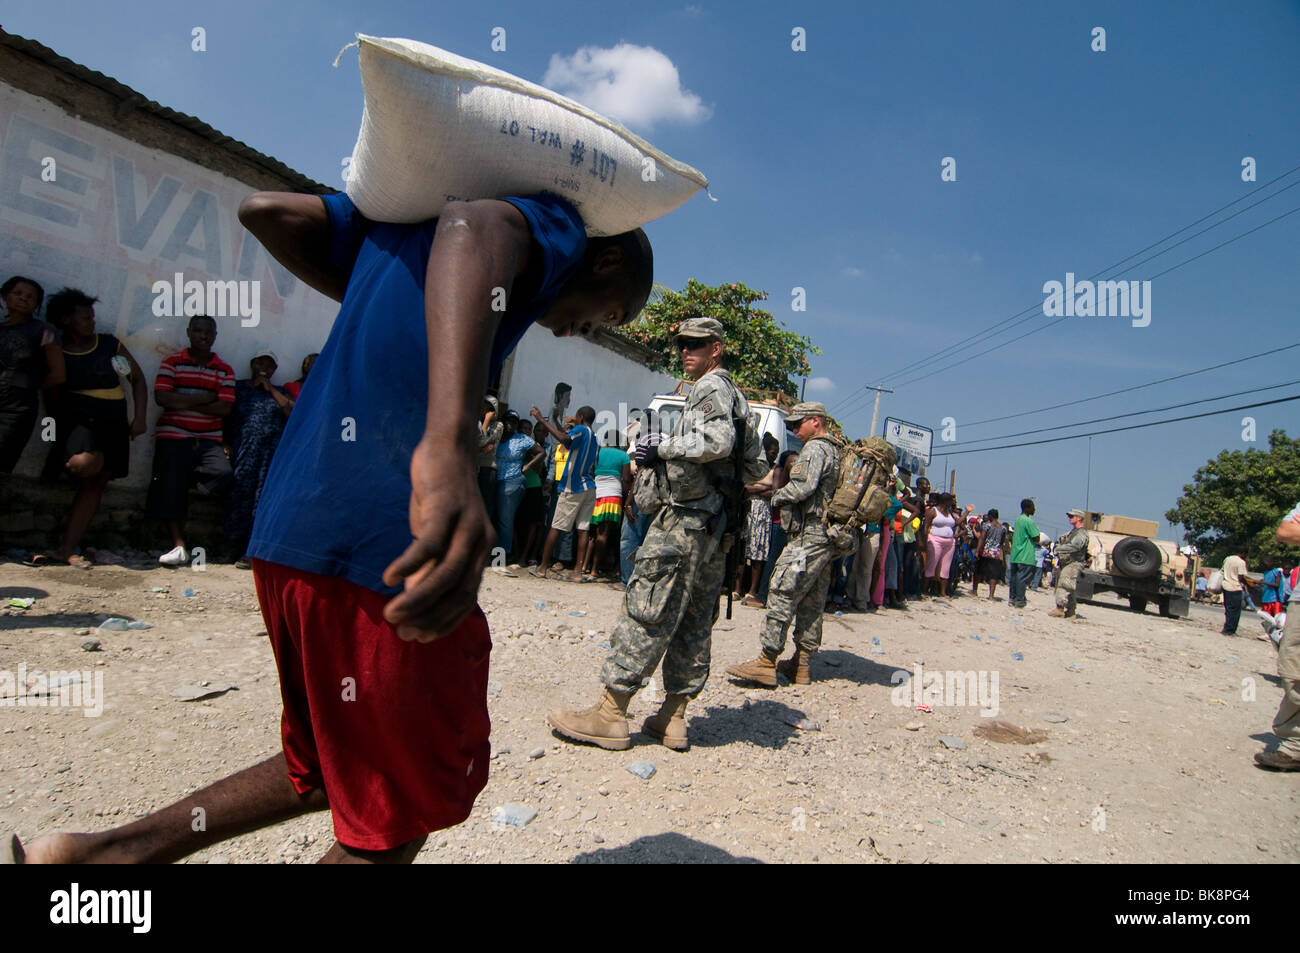 US Marine soldiers stand guard during food distribution in downtown of Port au Prince after a 7.0 magnitude earthquake struck Haiti on 12 January 2010 Stock Photo